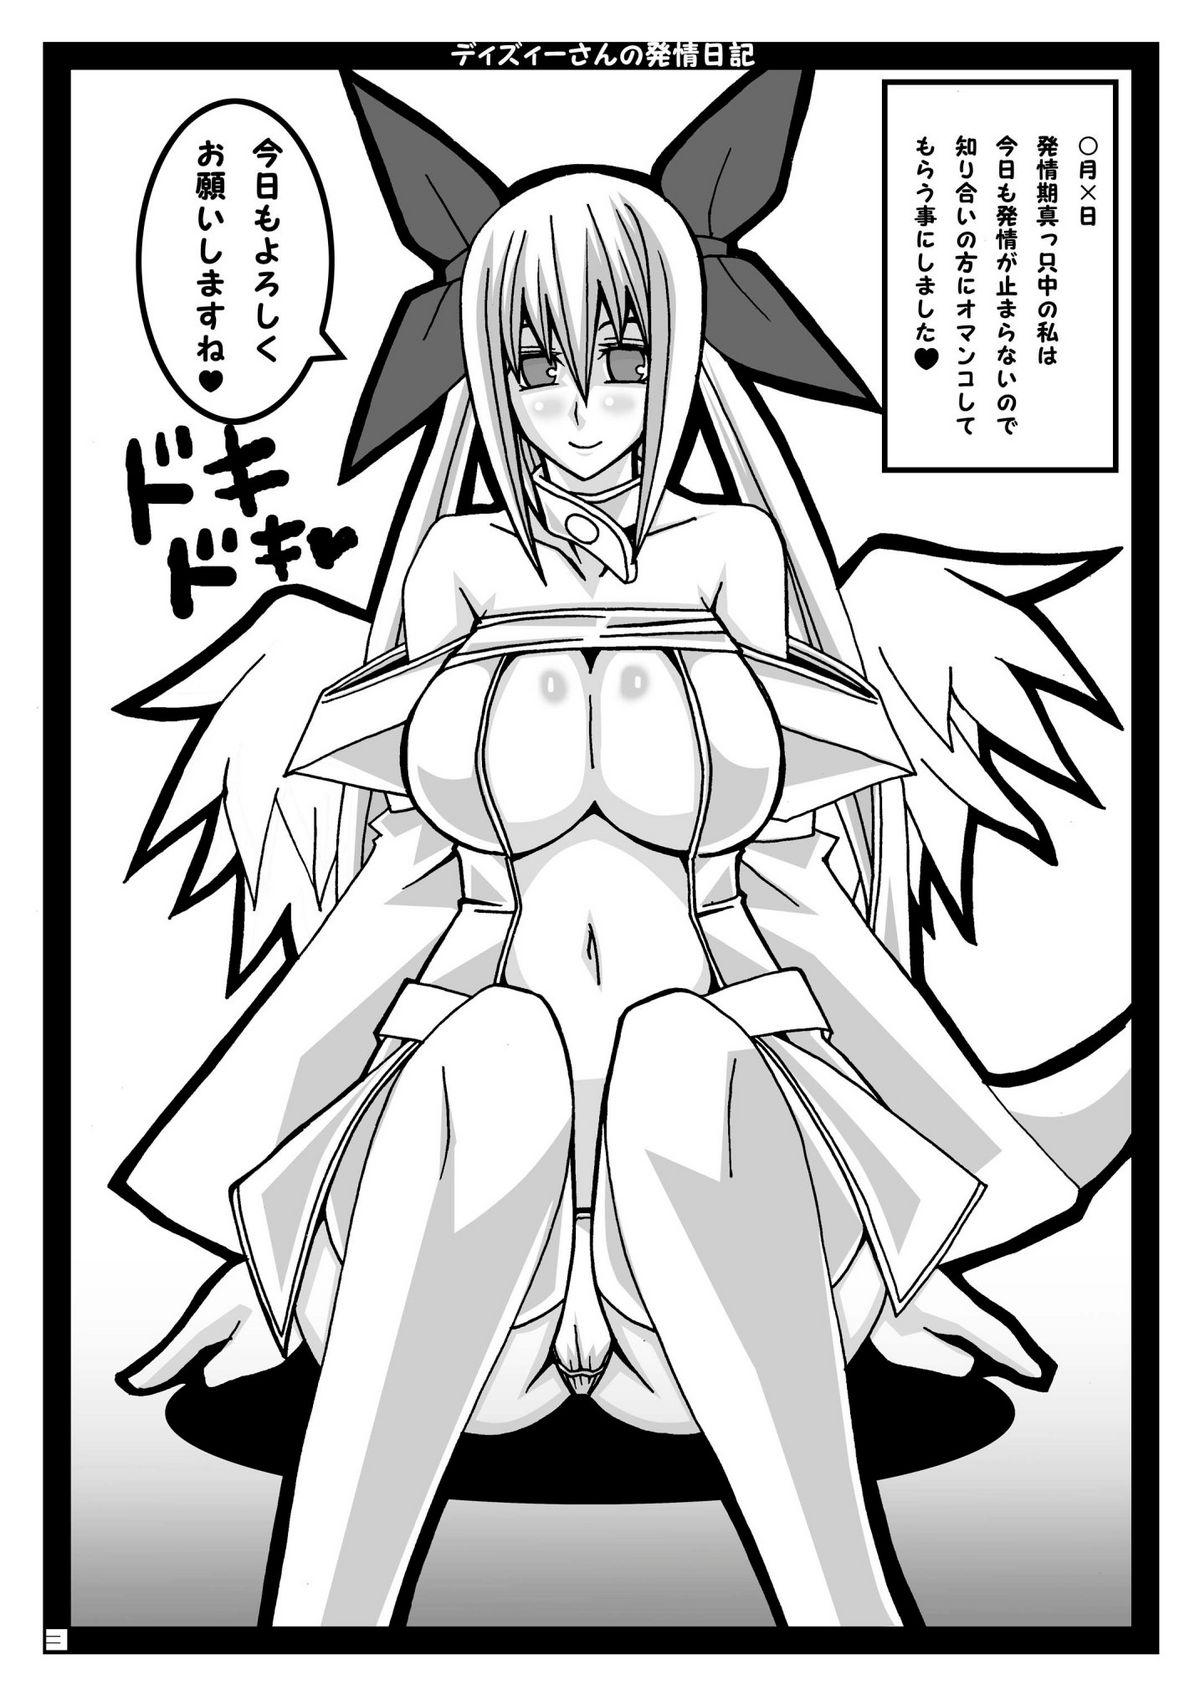 Tanned ディズィーさんの発情日記 ちょこっとぷらす - Guilty gear Negao - Page 3